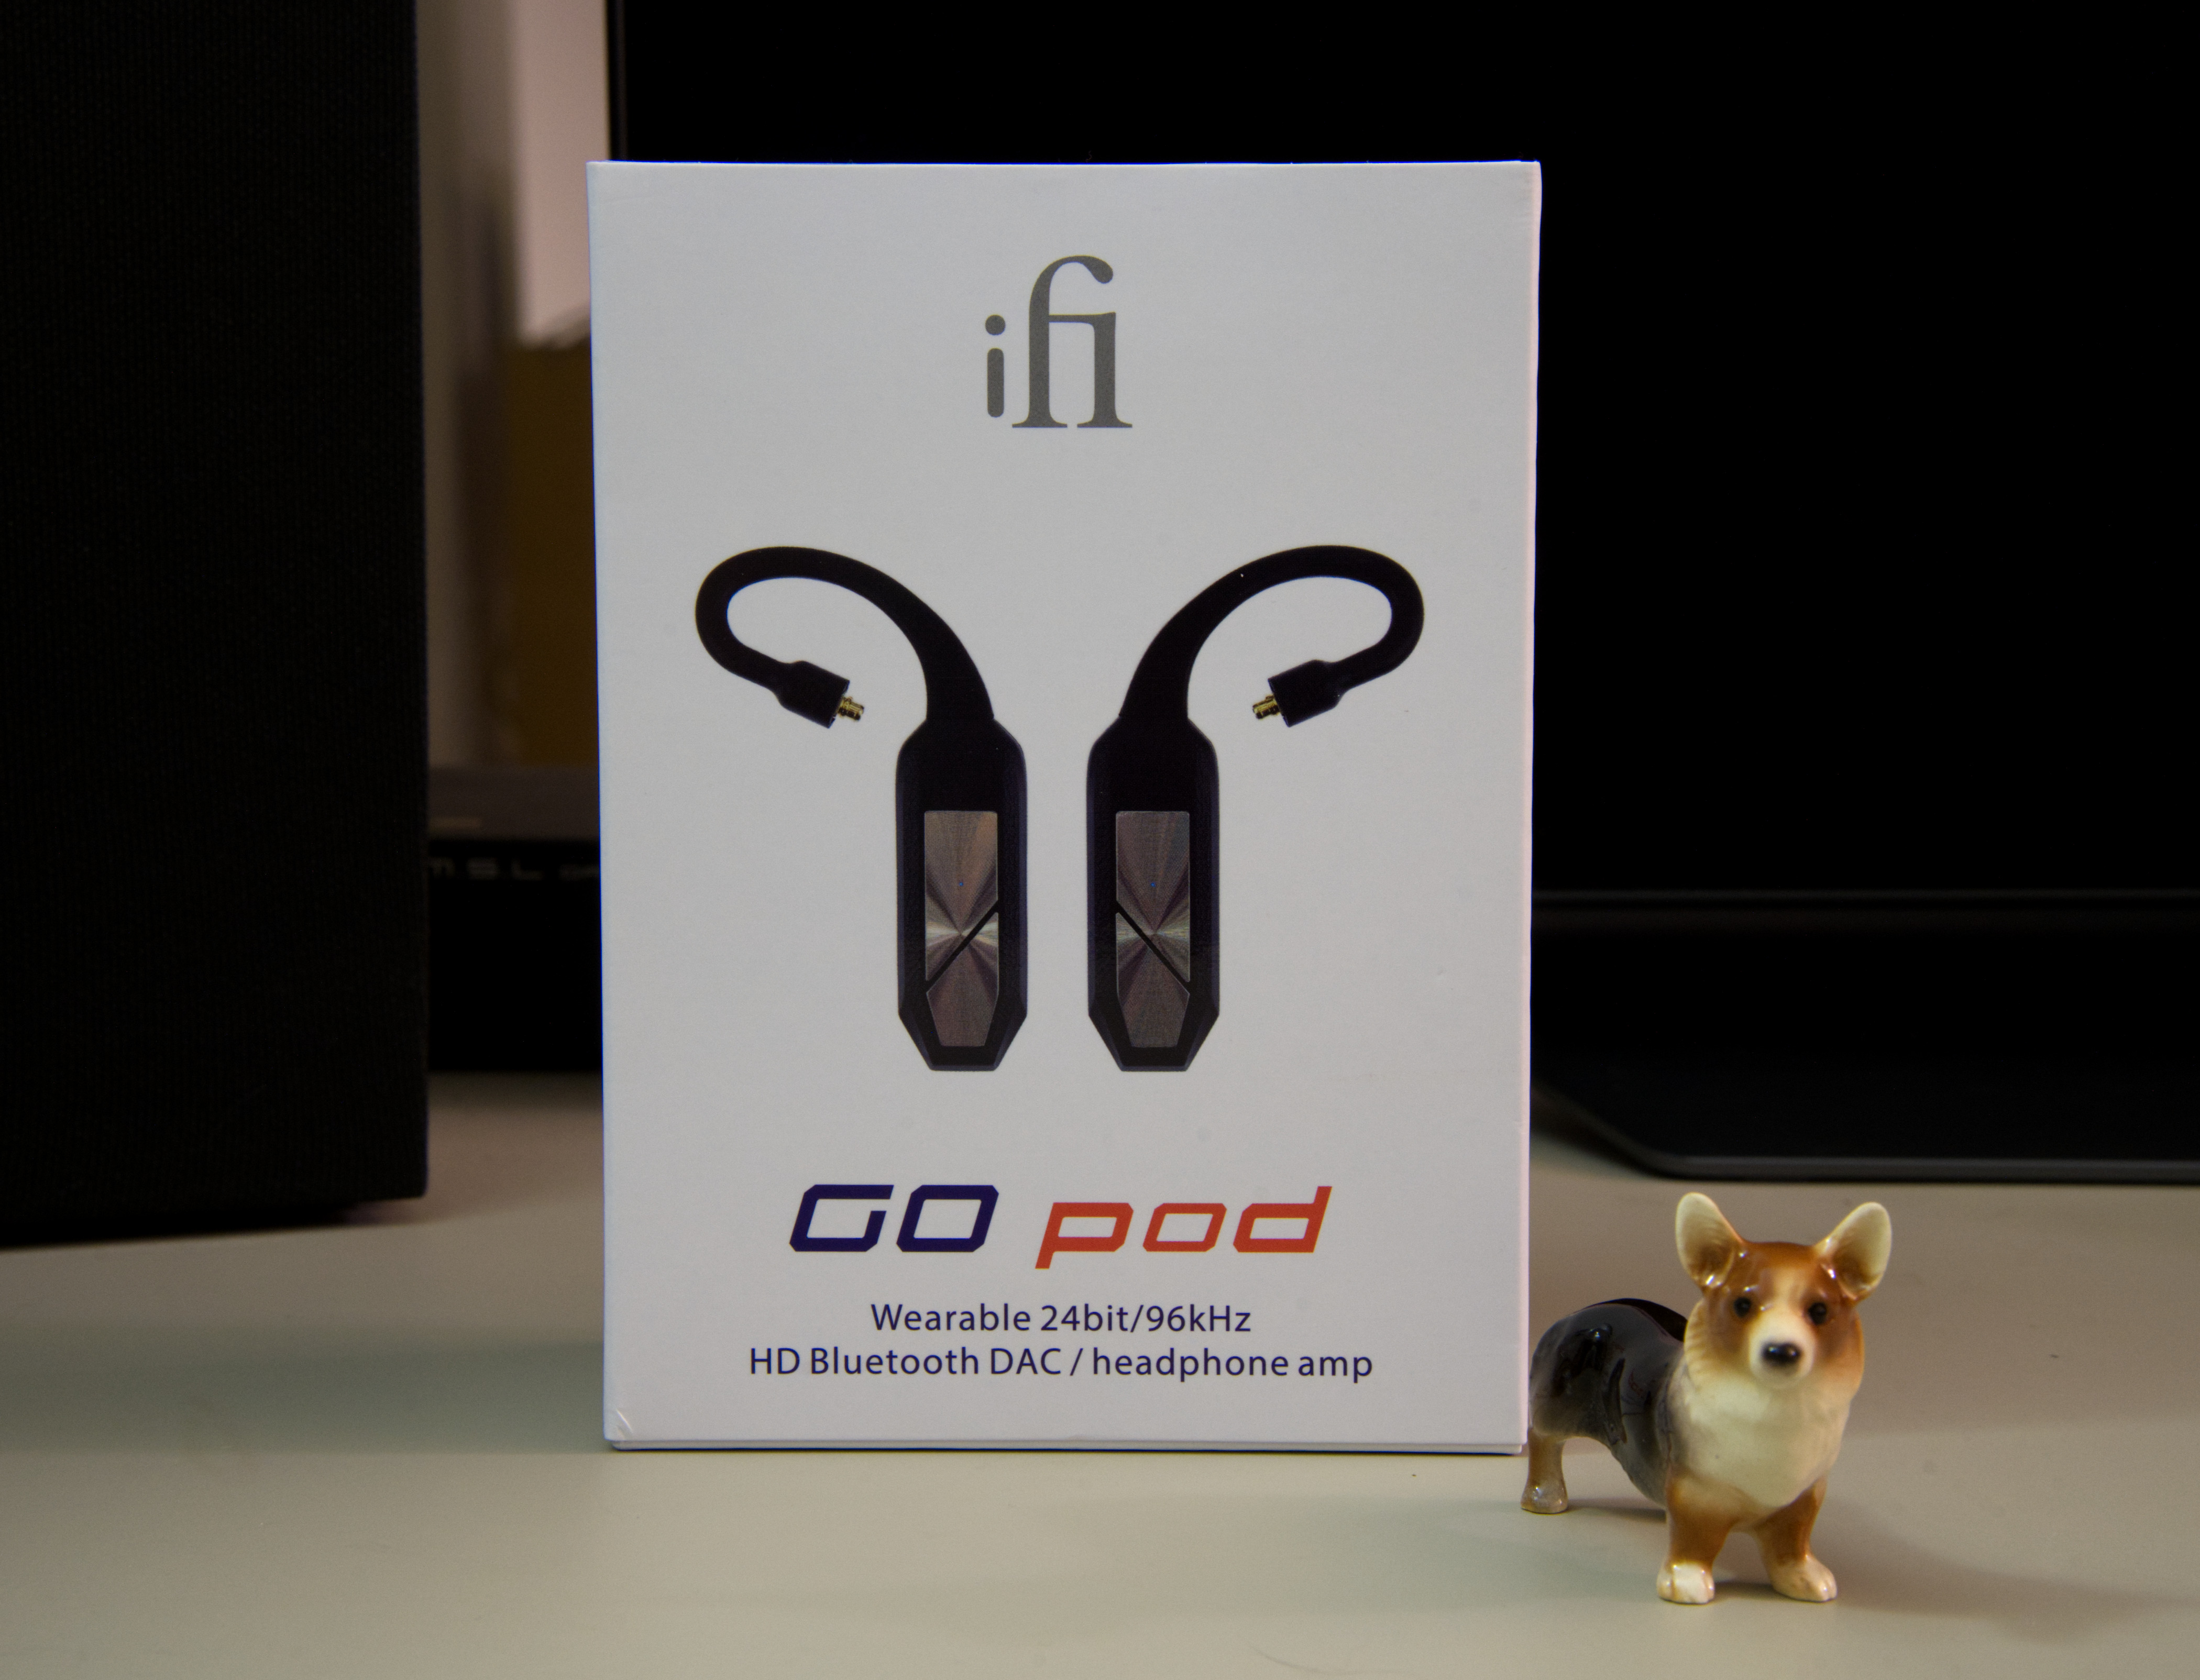 iFi GO pod Review: Almost the Perfect Alternative to TWS